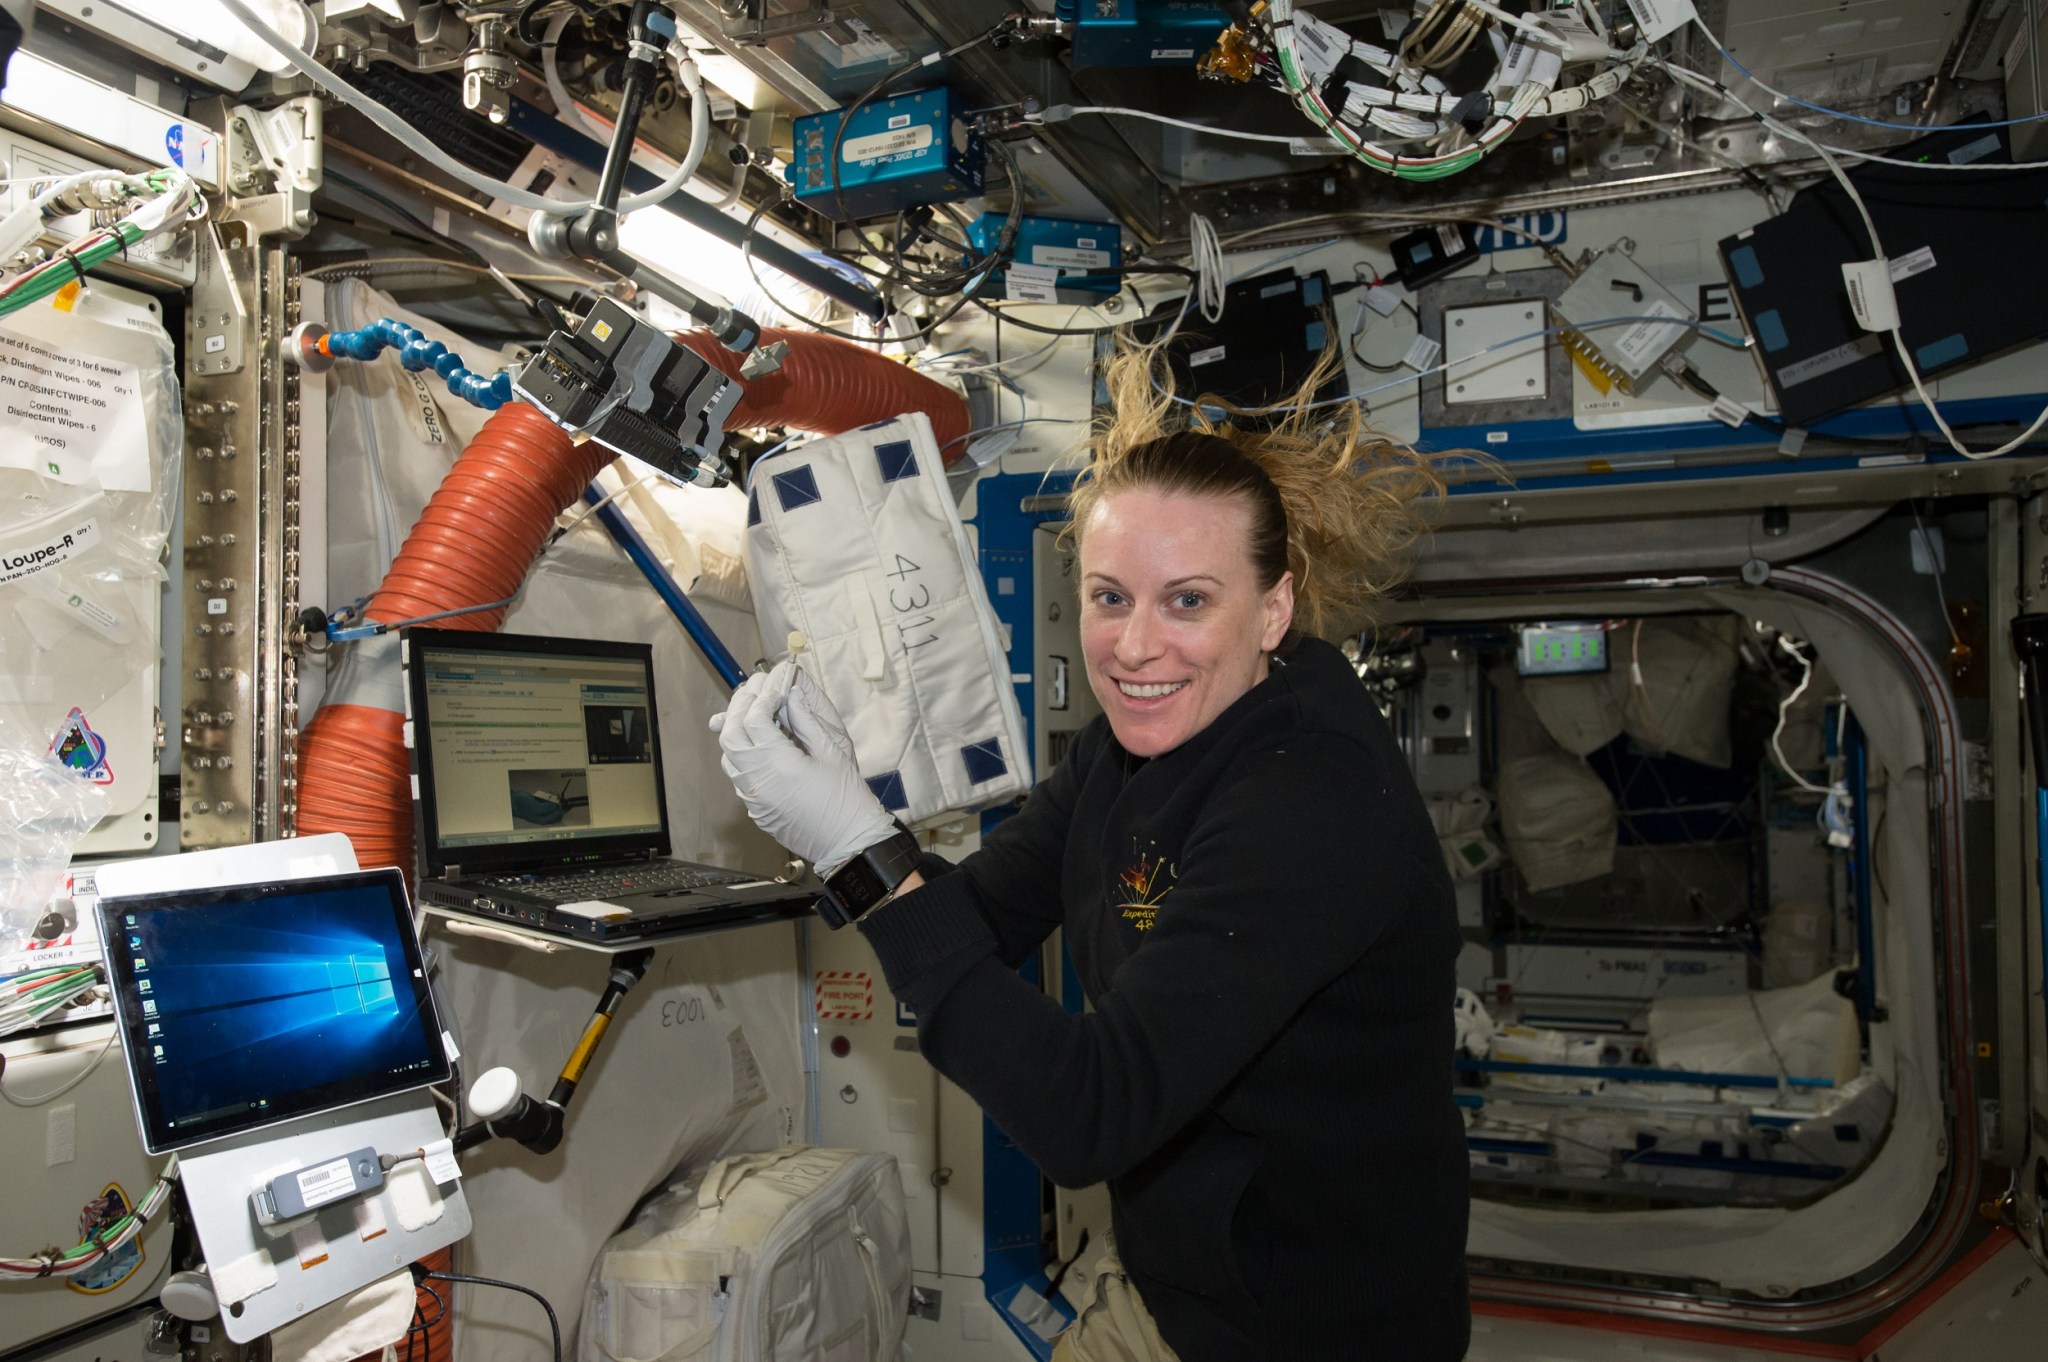 Rubins wears a black sweatshirt as she holds a small experiment tube and smiles at the camera. There are two laptops in front of her and equipment and wiring above her.